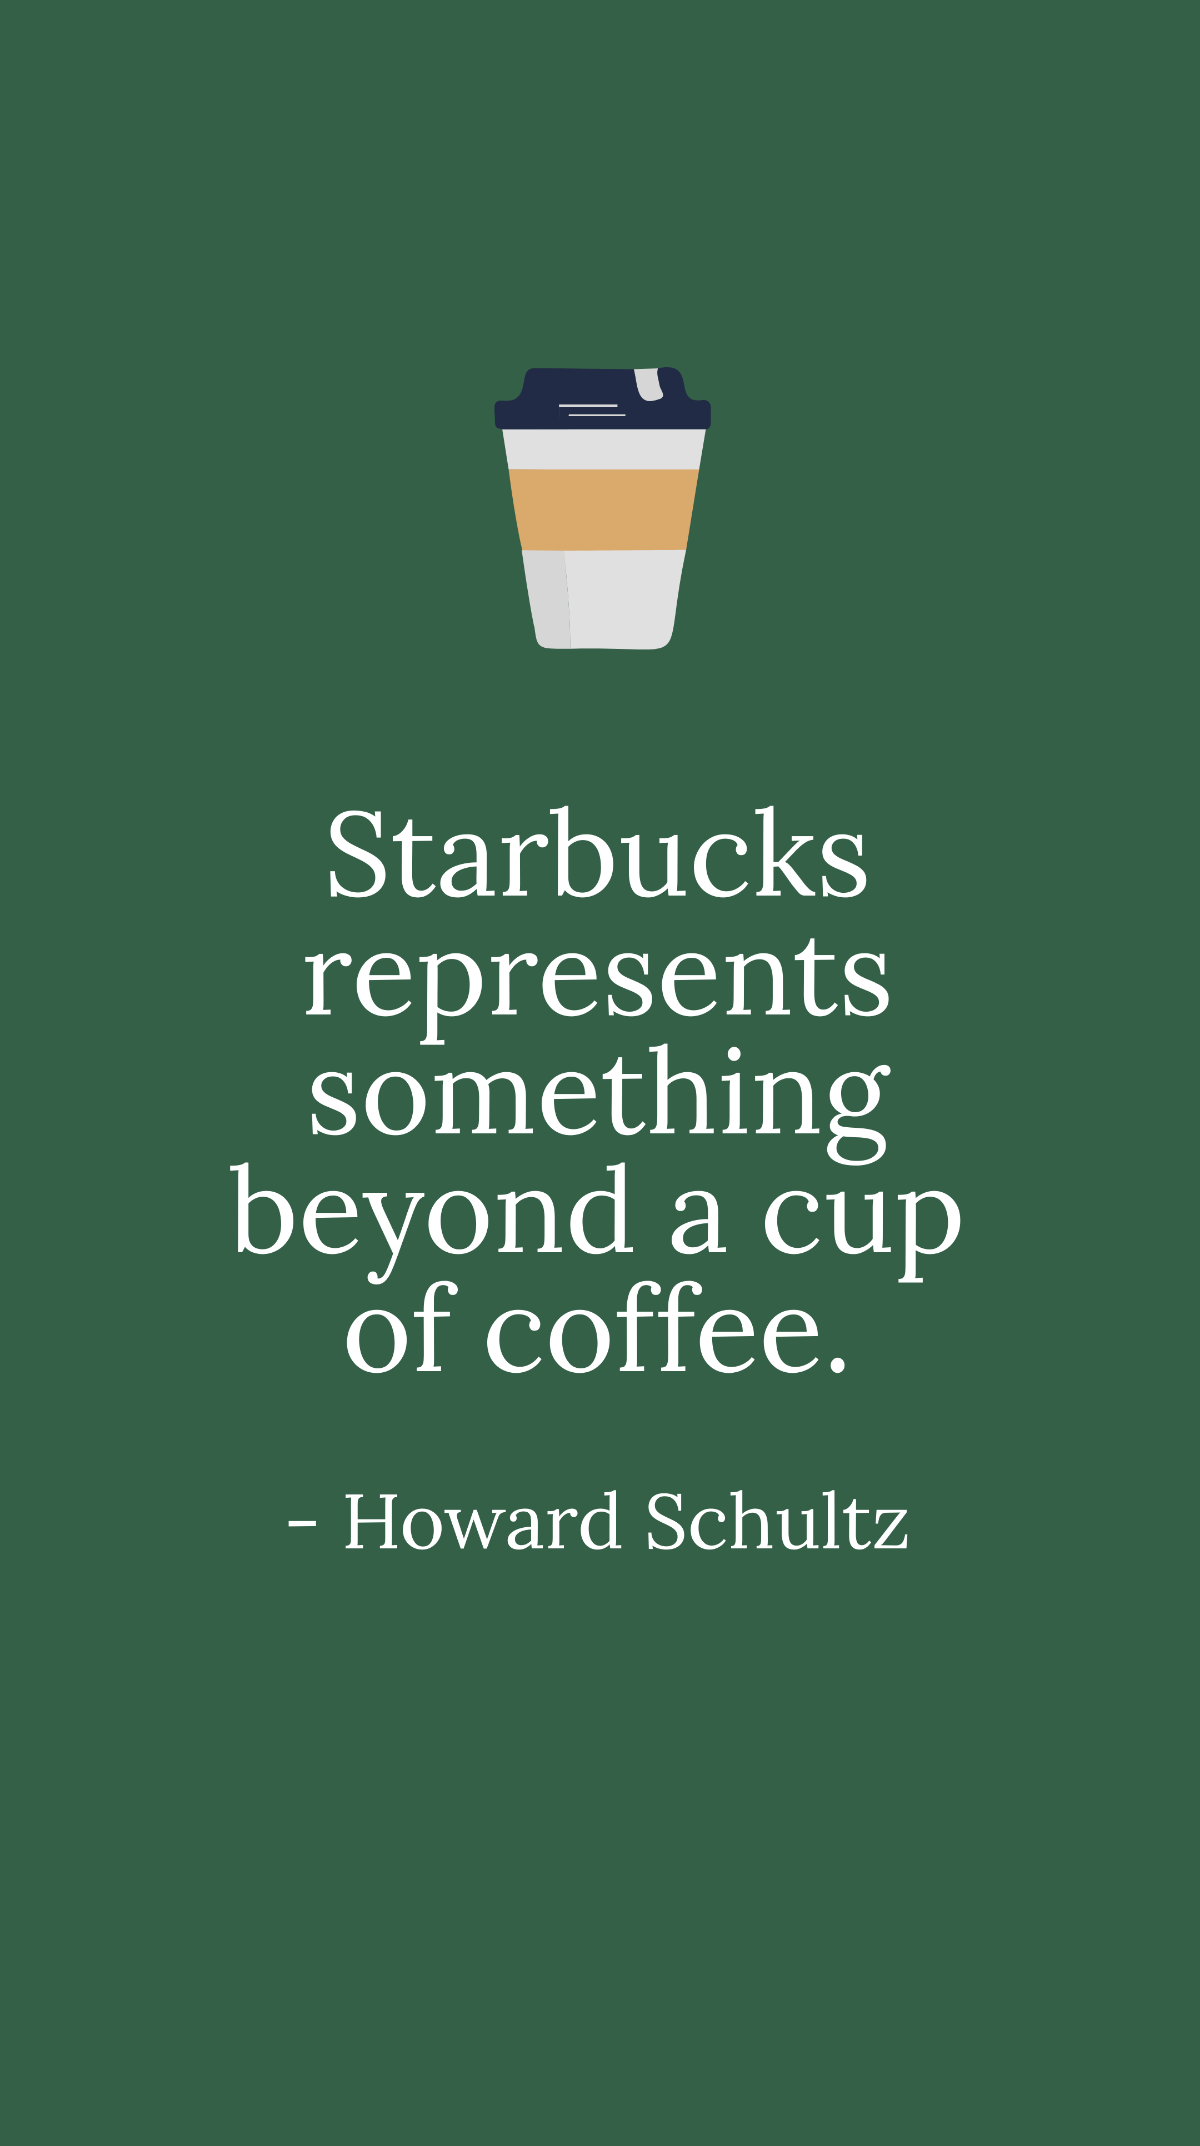 Howard Schultz - Starbucks represents something beyond a cup of coffee.